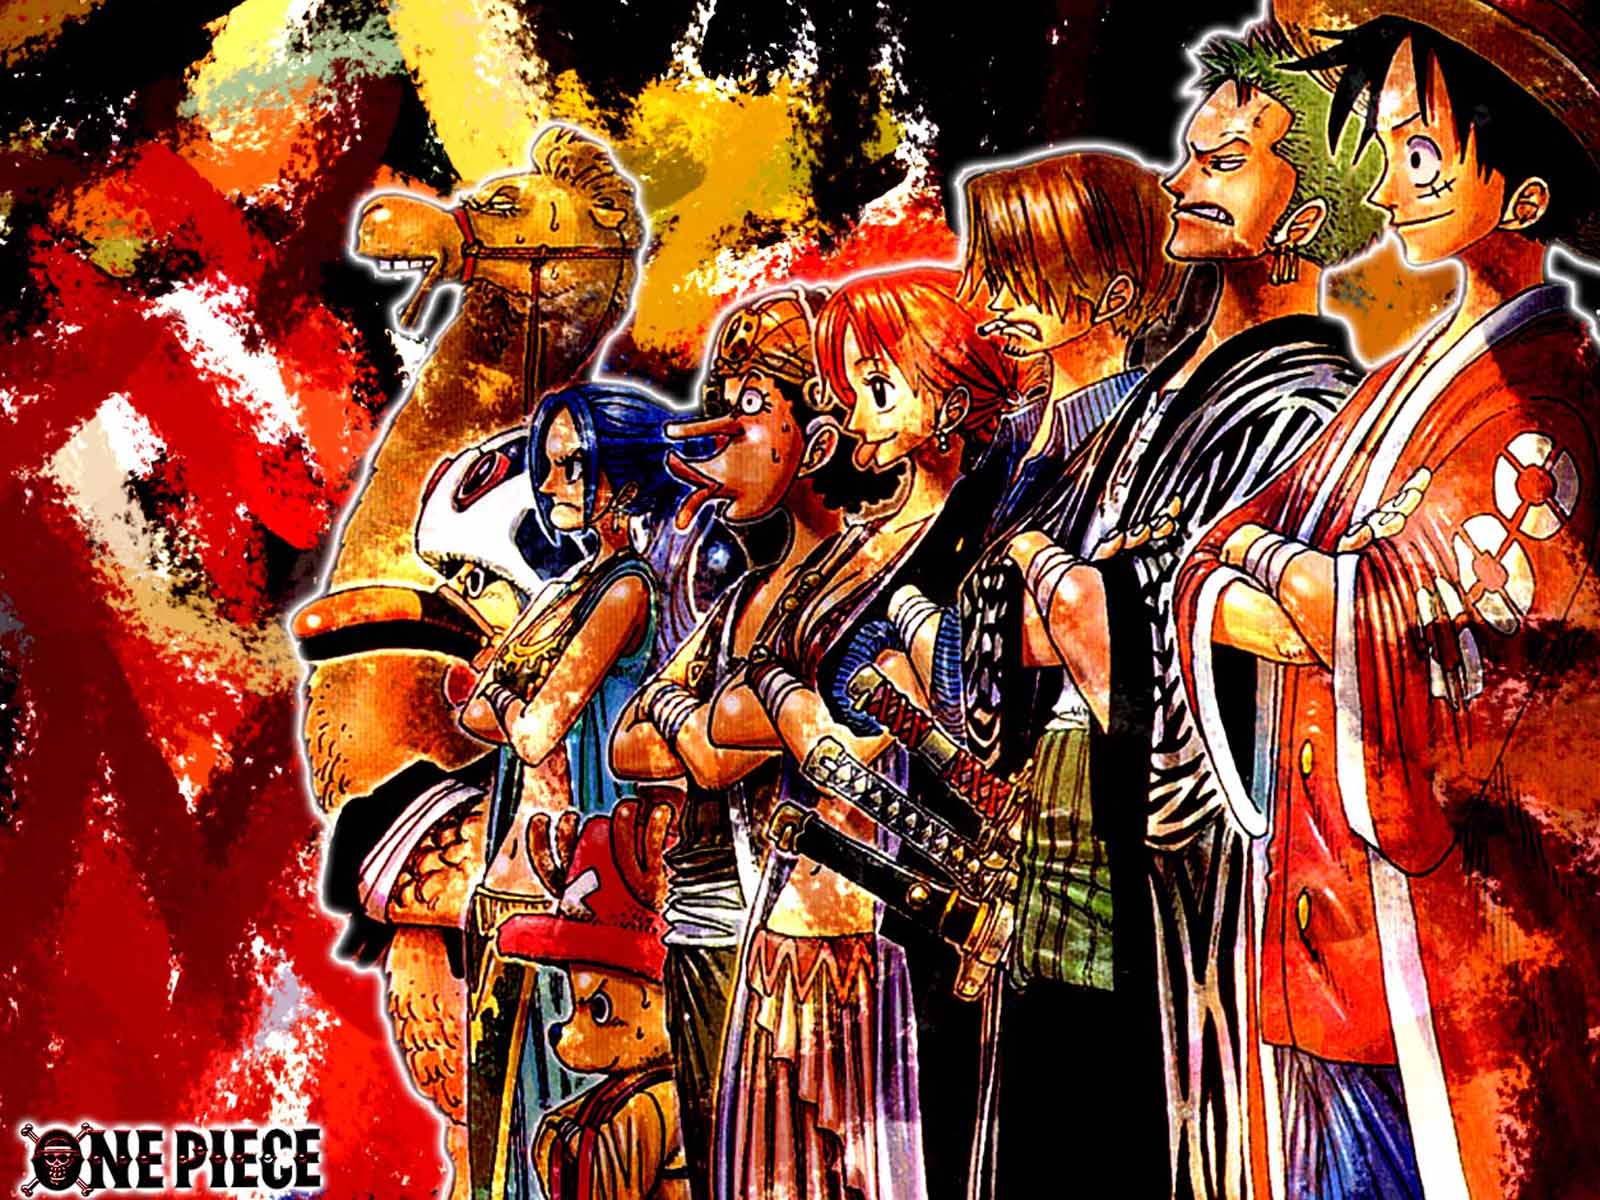 Straw Hat Pirates from One Piece Film Red 4K wallpaper download